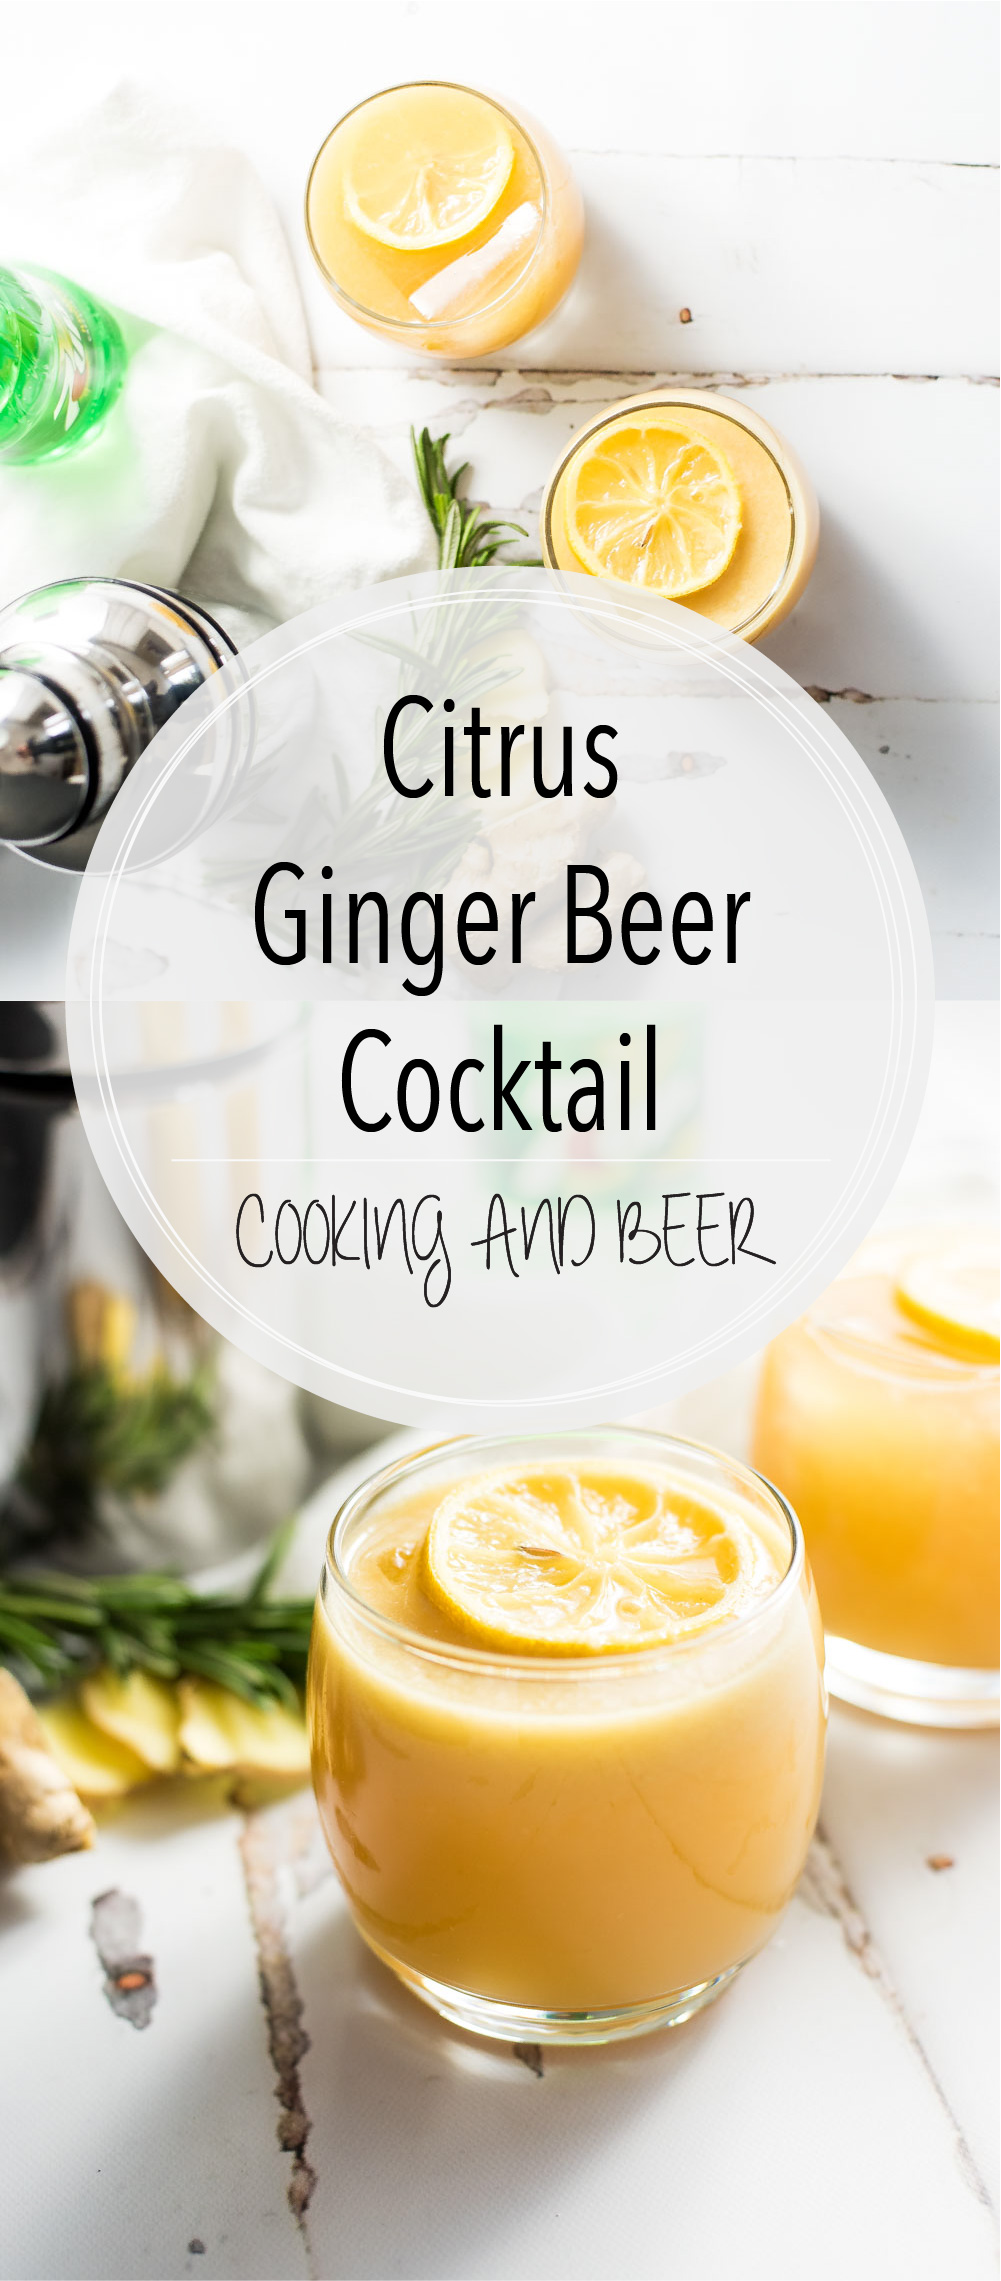 Citrus ginger beer cocktail with candied lemon slices is the perfect drink using 7UP®, fresh ginger, and freshly squeezed orange juice! It is kicked up a notch with both bourbon and pale ale beer creating a flavor explosion!